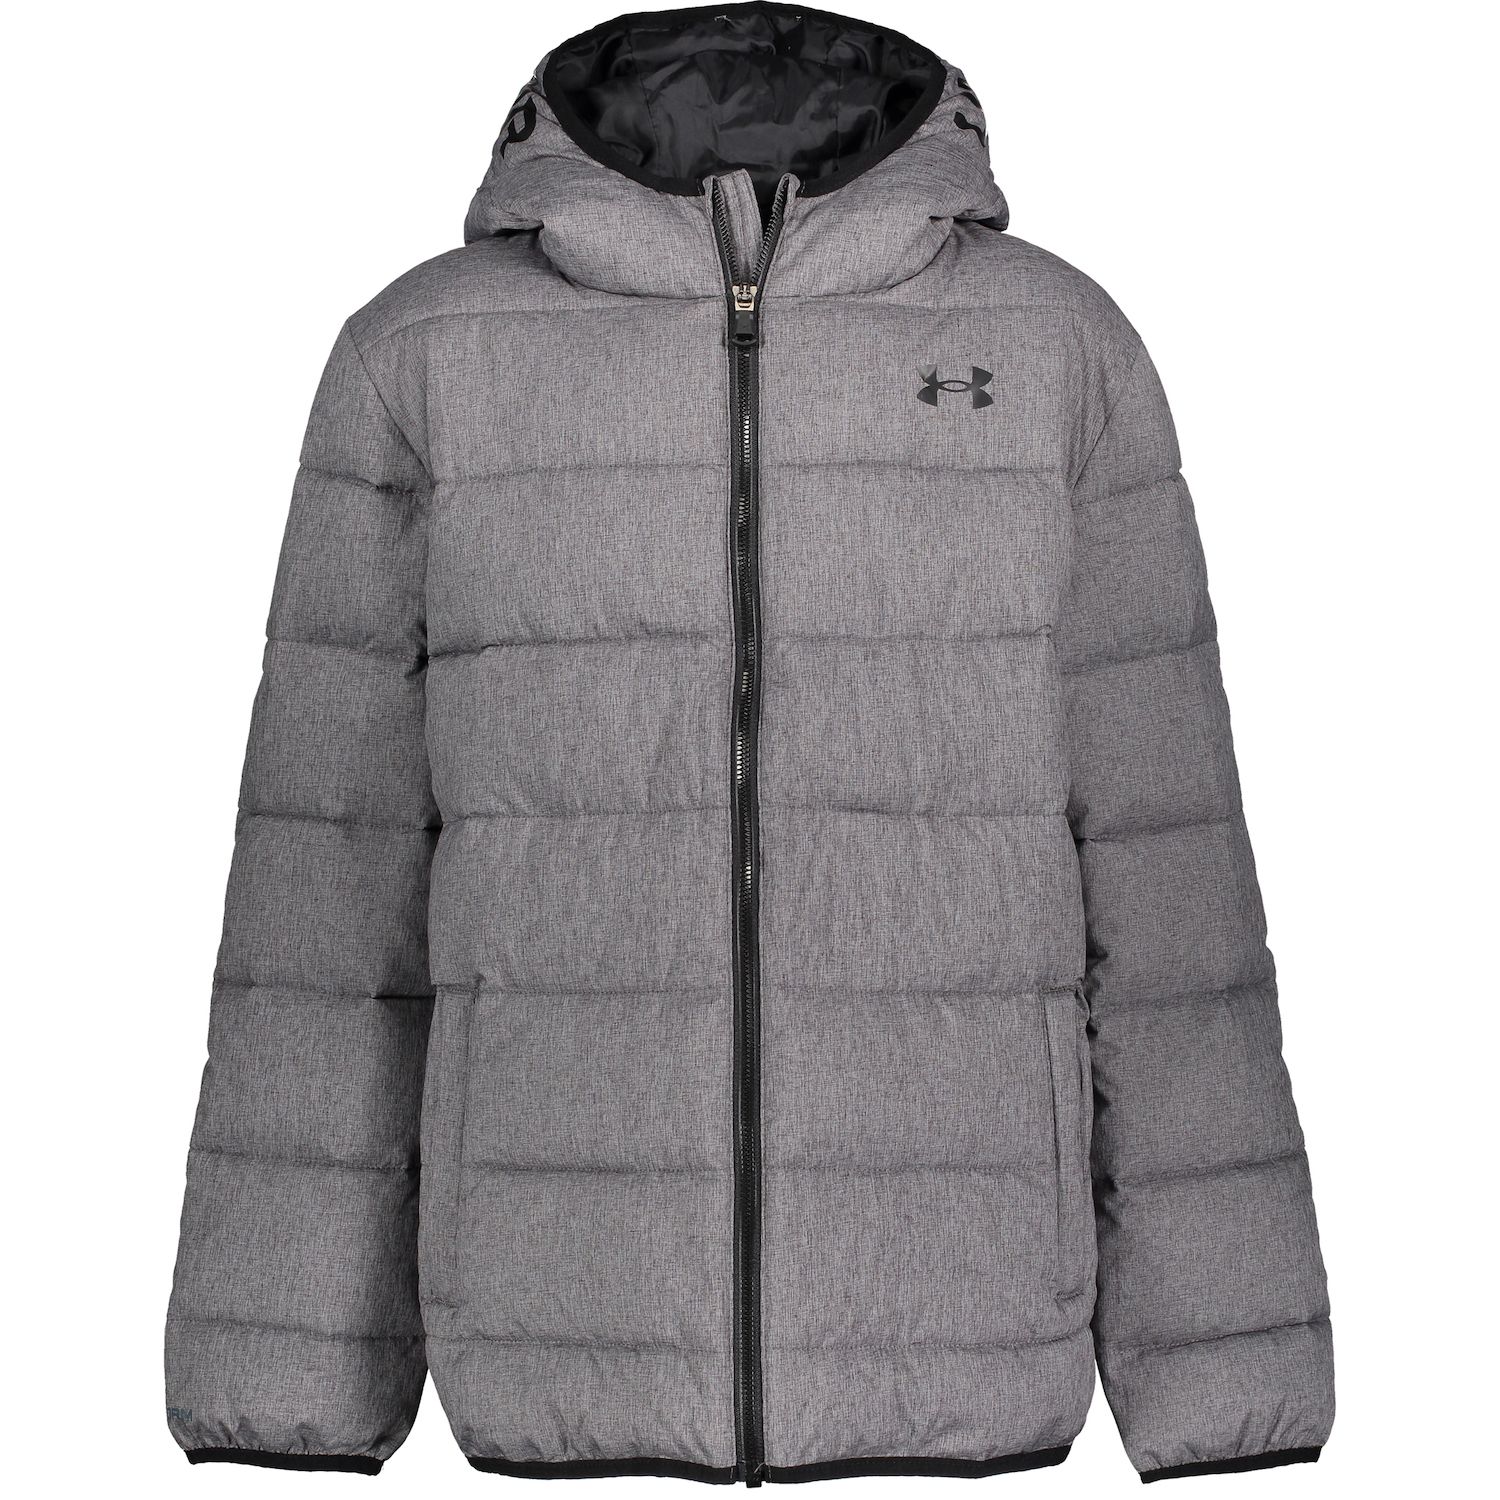 under armour puffer jacket youth